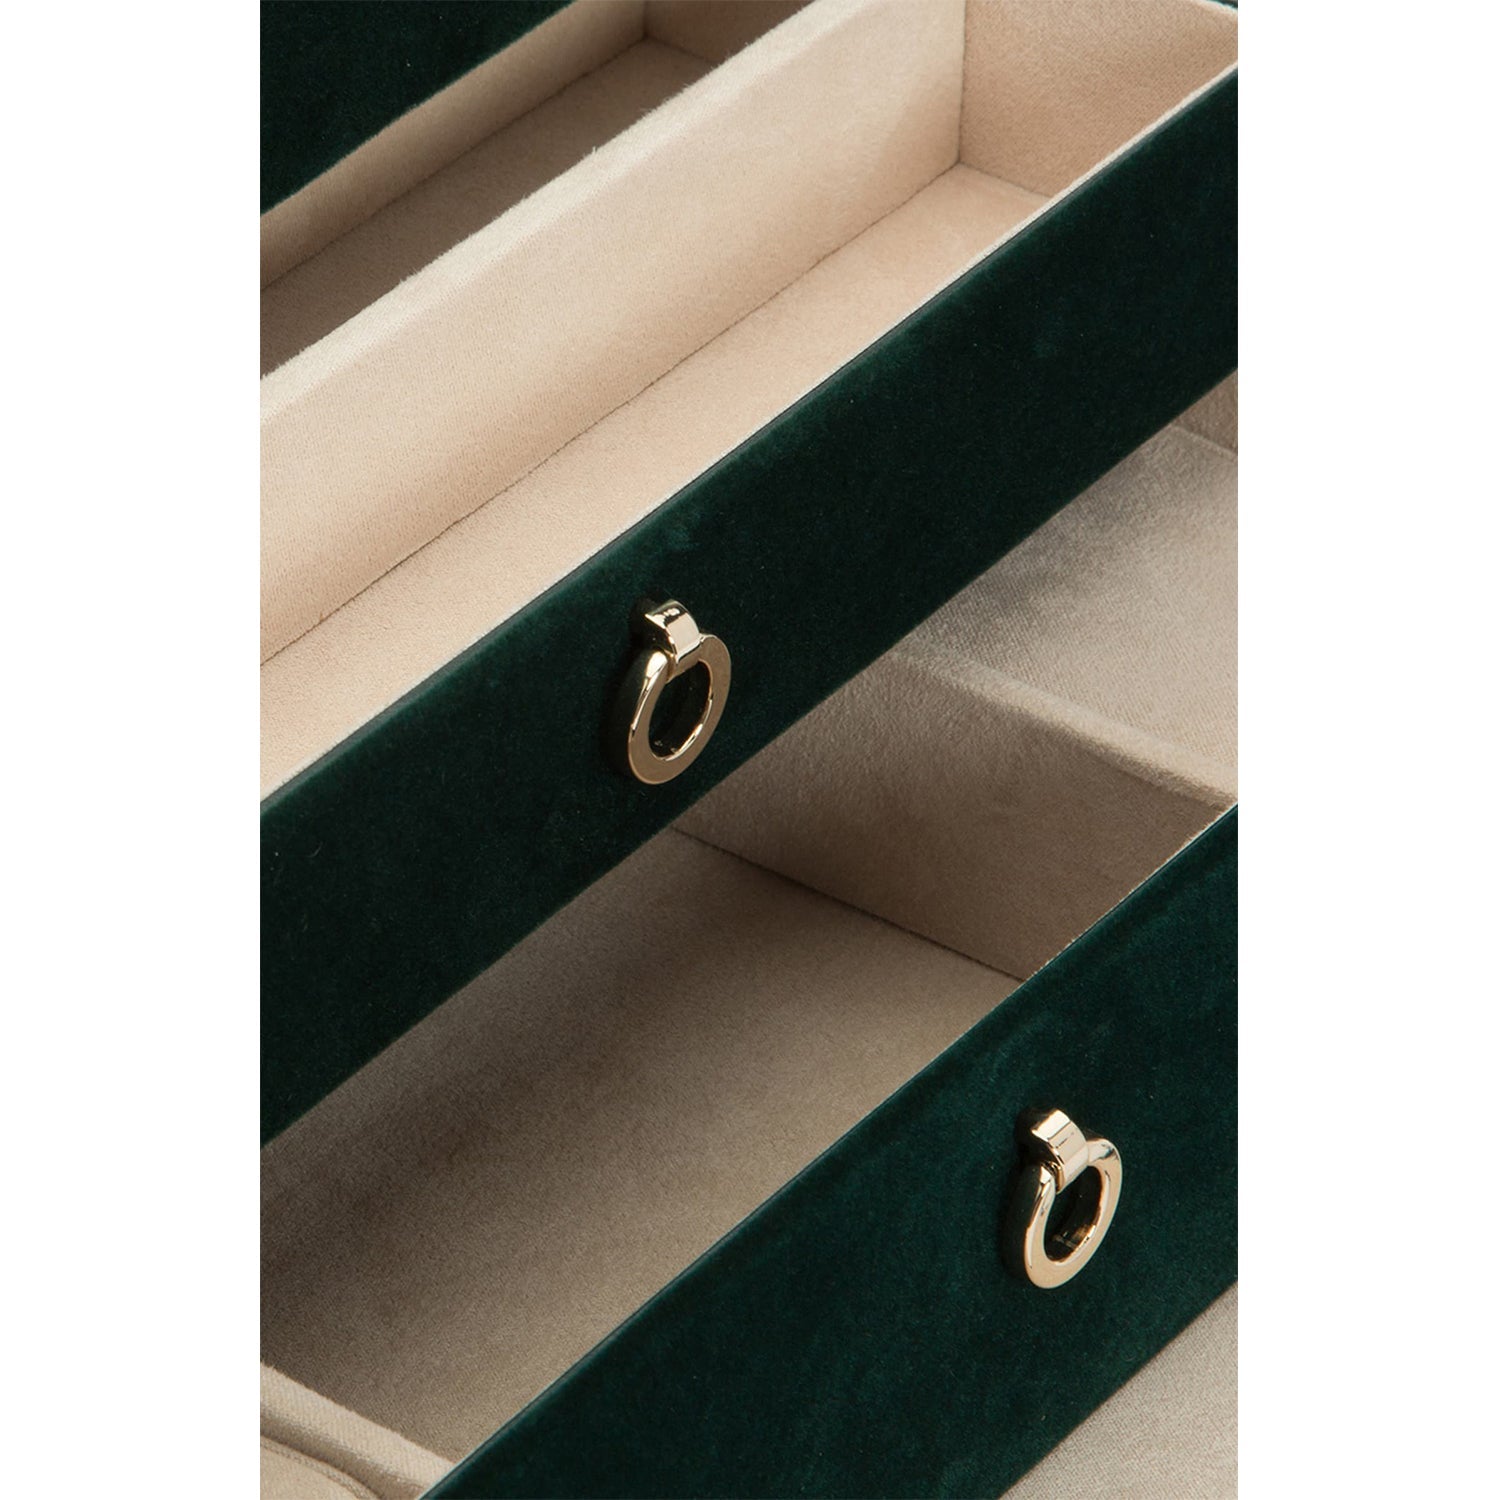 MEDIUM ZOE JEWELRY CASE, Forest green velvet 10 small compartments: 4 medium compartments, 3 large compartments, 4 bracelet compartments, 4 bracelet/watch cuffs, and removable mini travel piece LusterLoc™: Allows the fabric lining the inside of your jewel